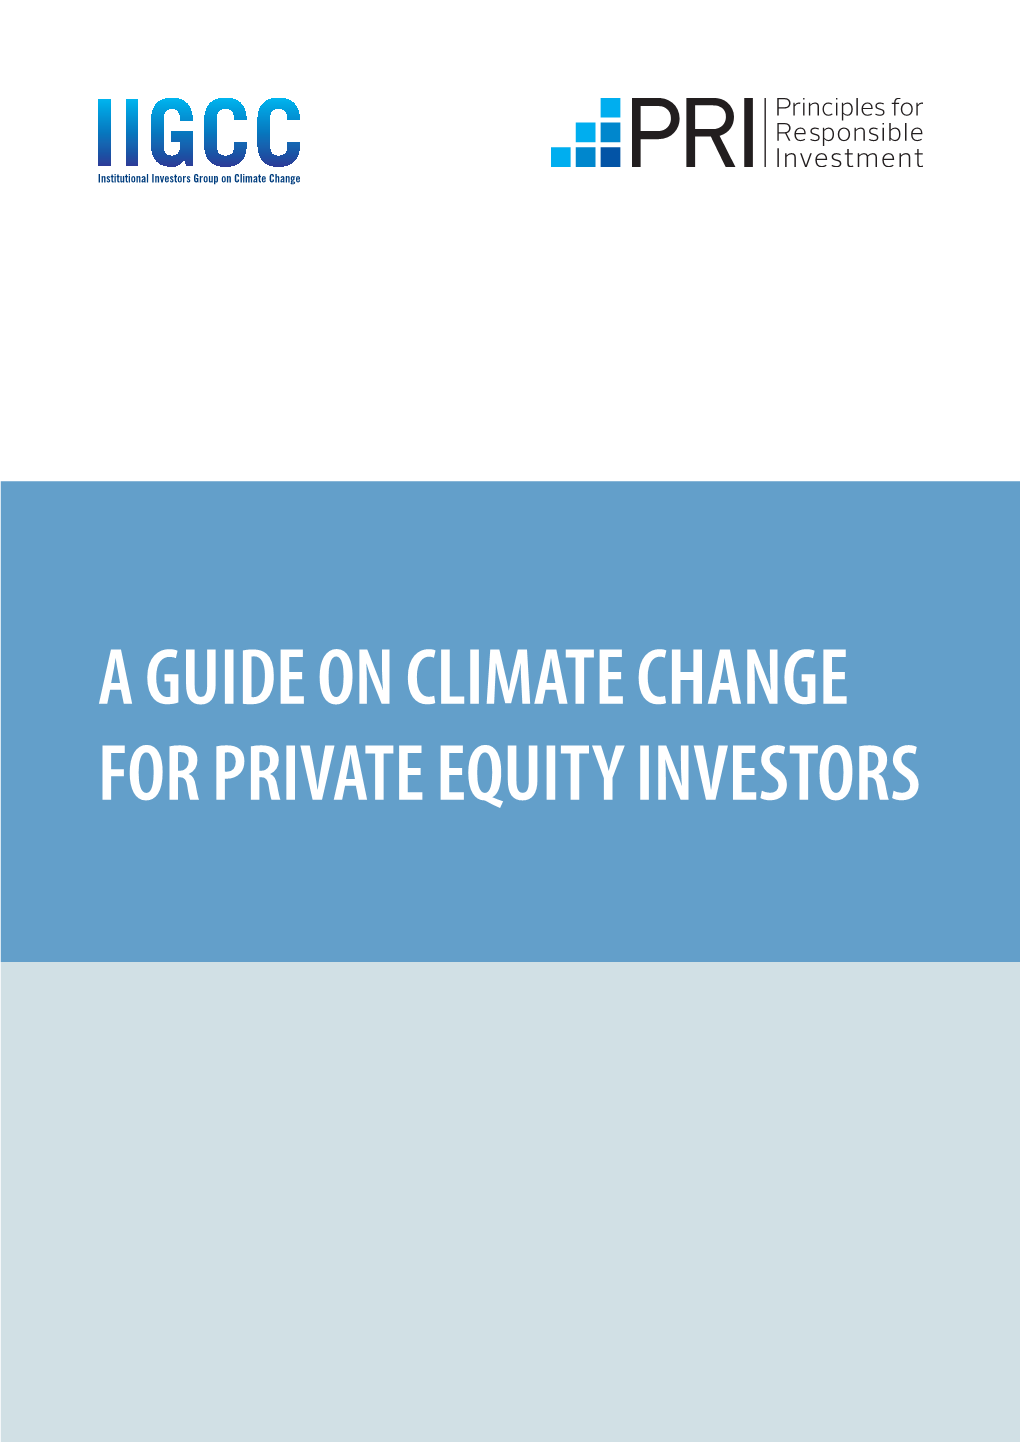 A GUIDE on CLIMATE CHANGE for PRIVATE EQUITY INVESTORS Contents